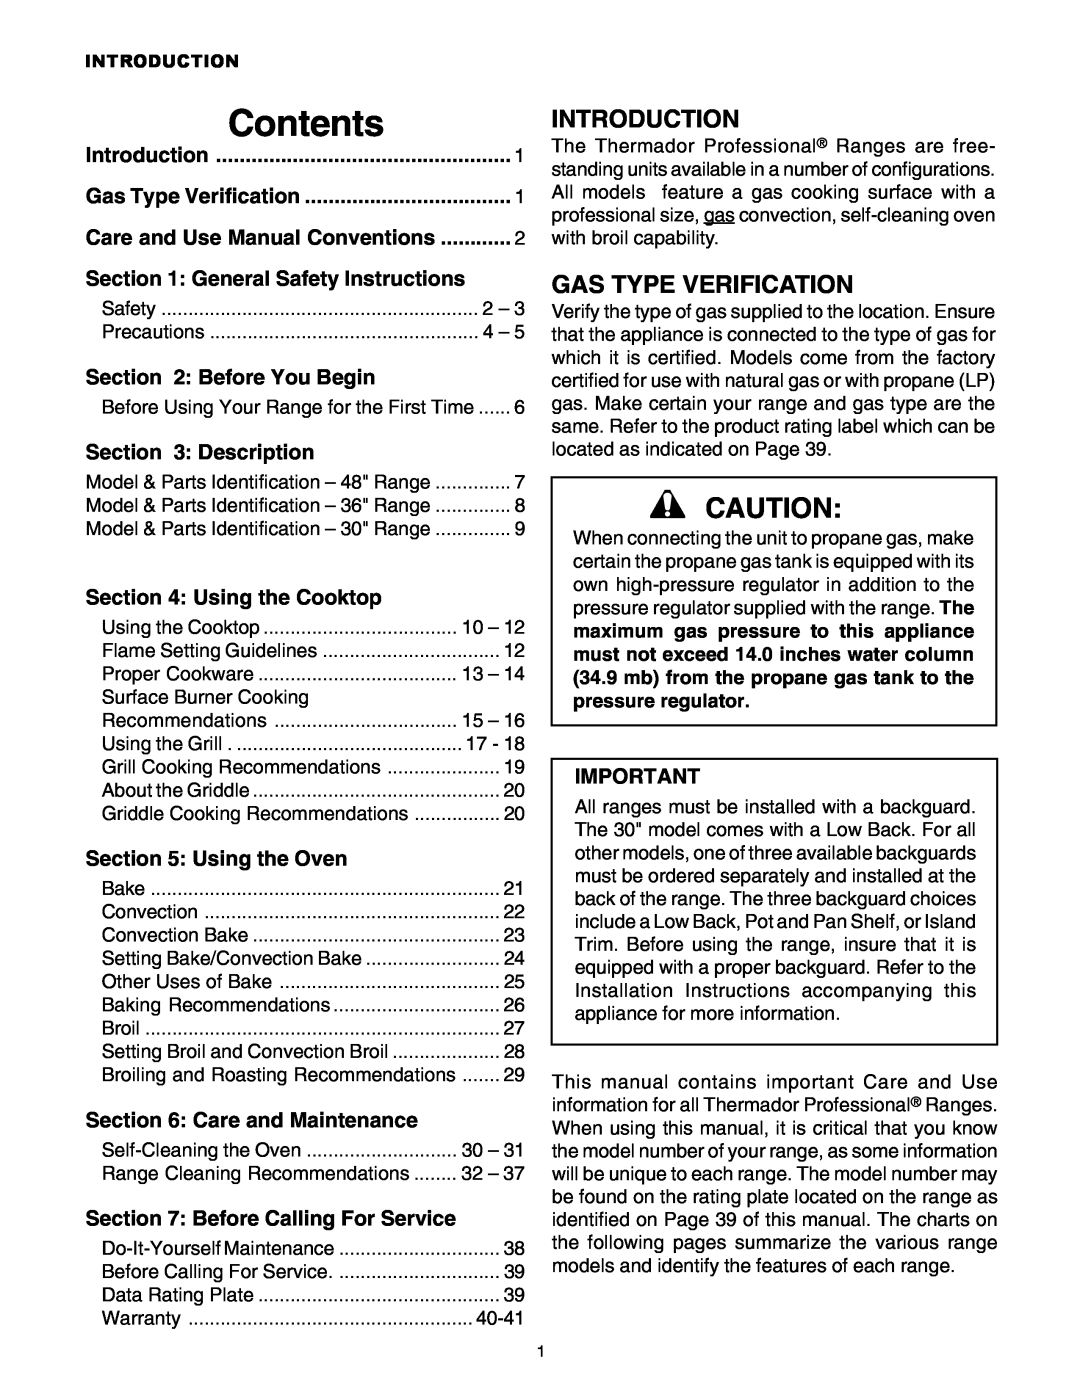 Thermador PG30 Contents, Introduction, Gas Type Verification, General Safety Instructions, Before You Begin, Description 